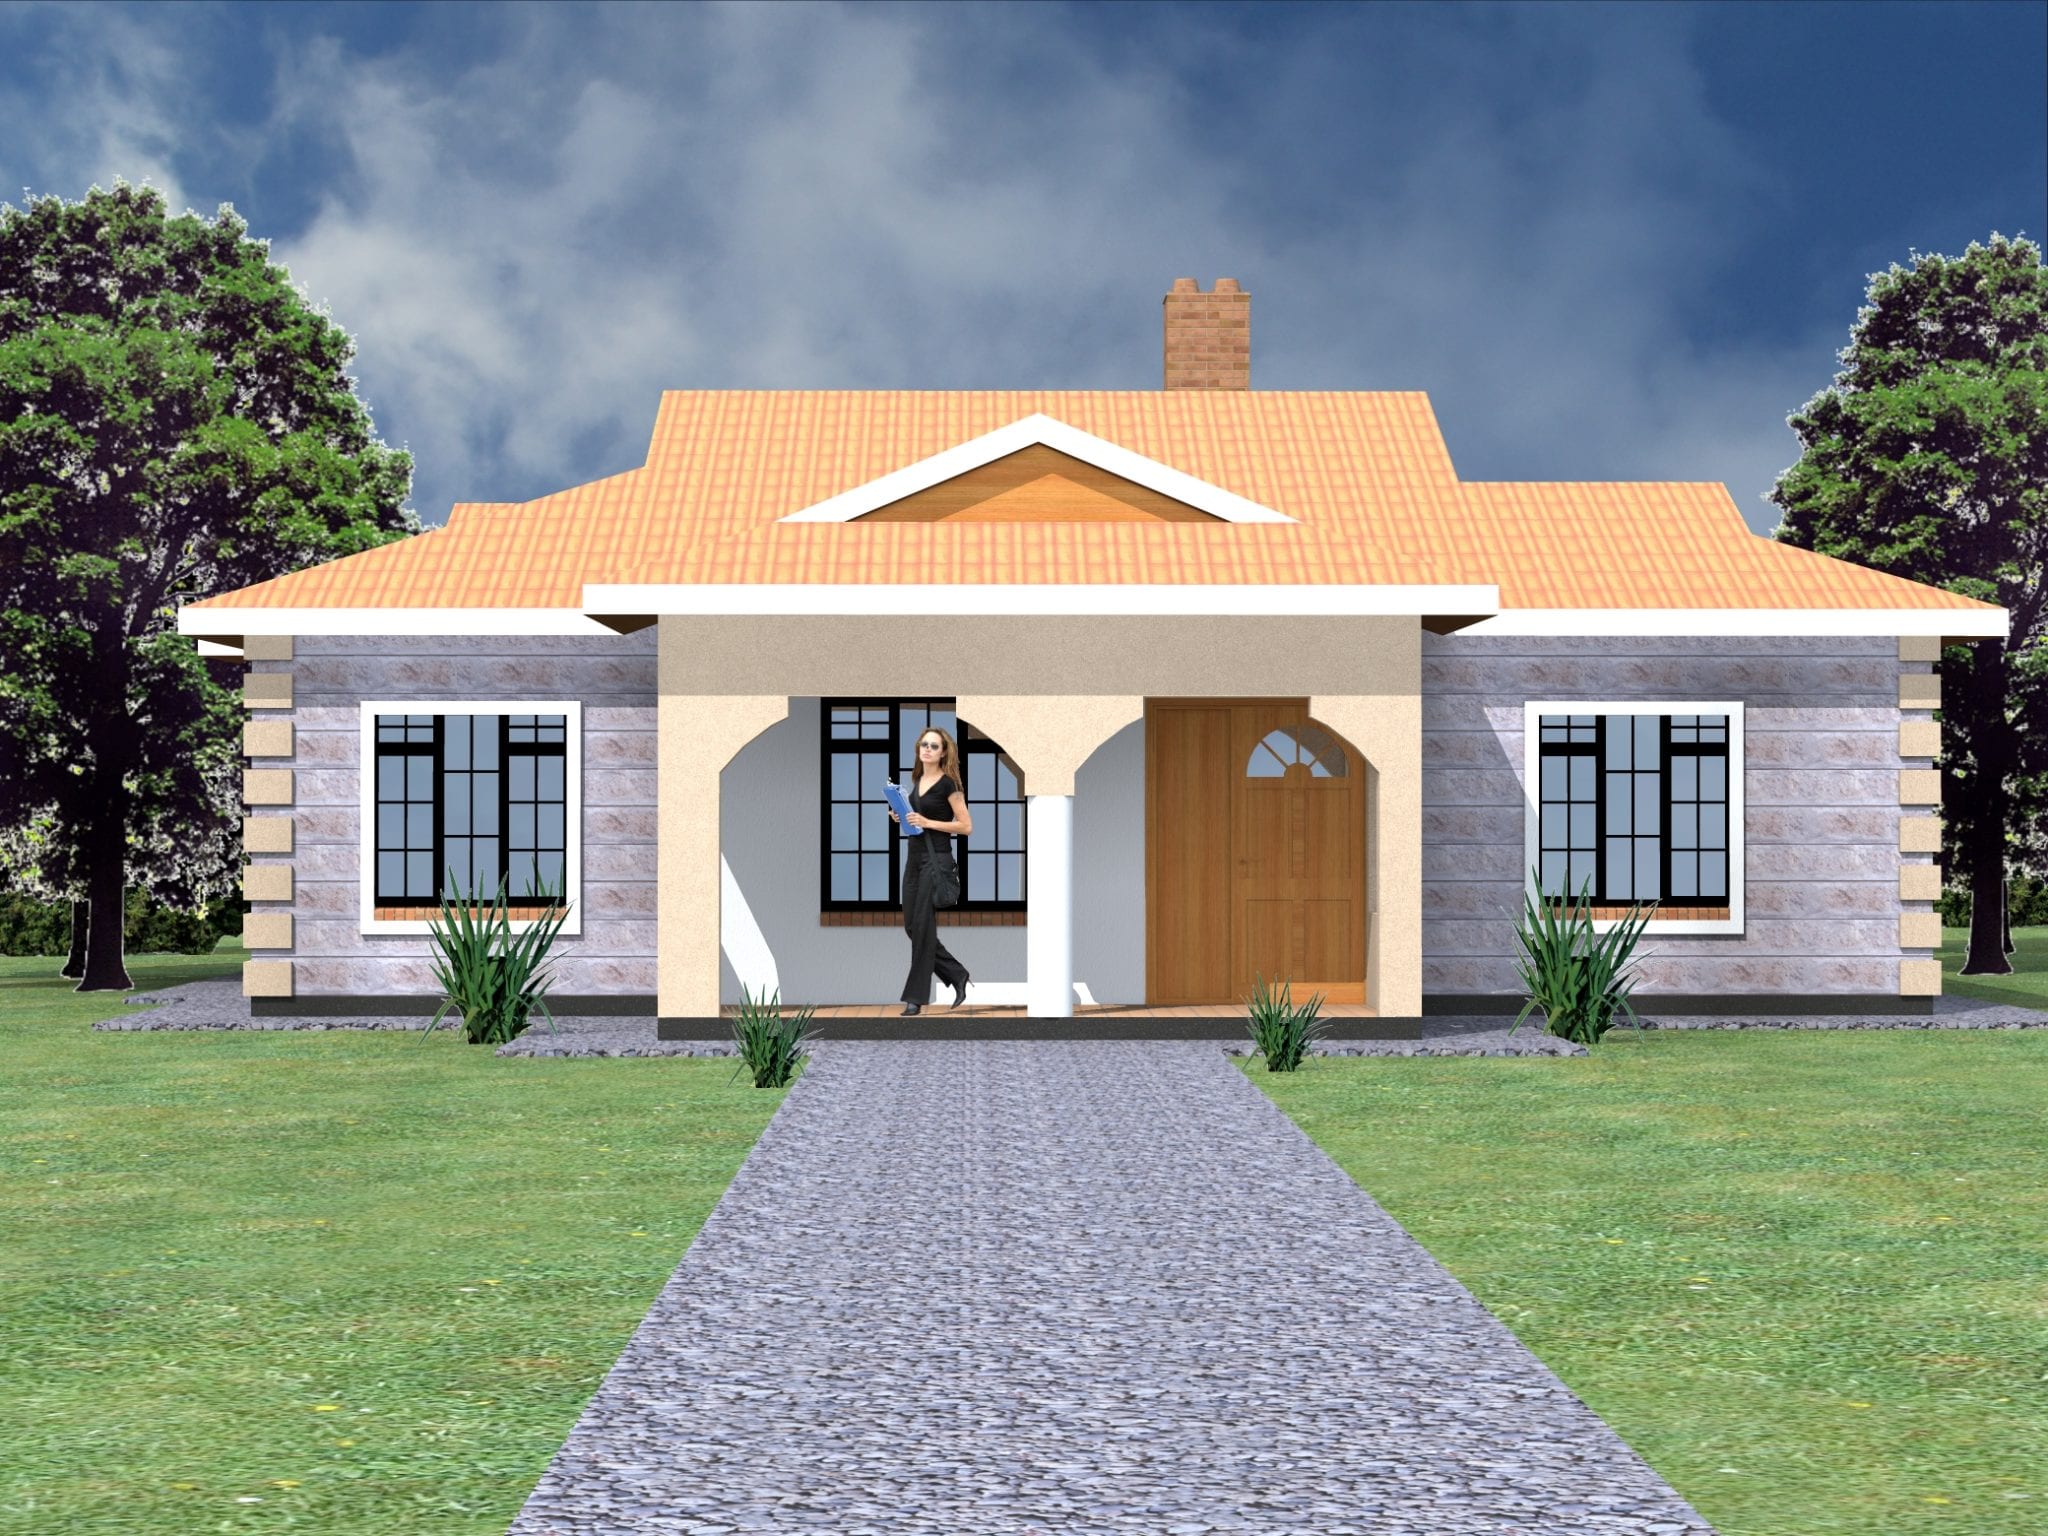 Simple House Designs Images - Simple House Ideas